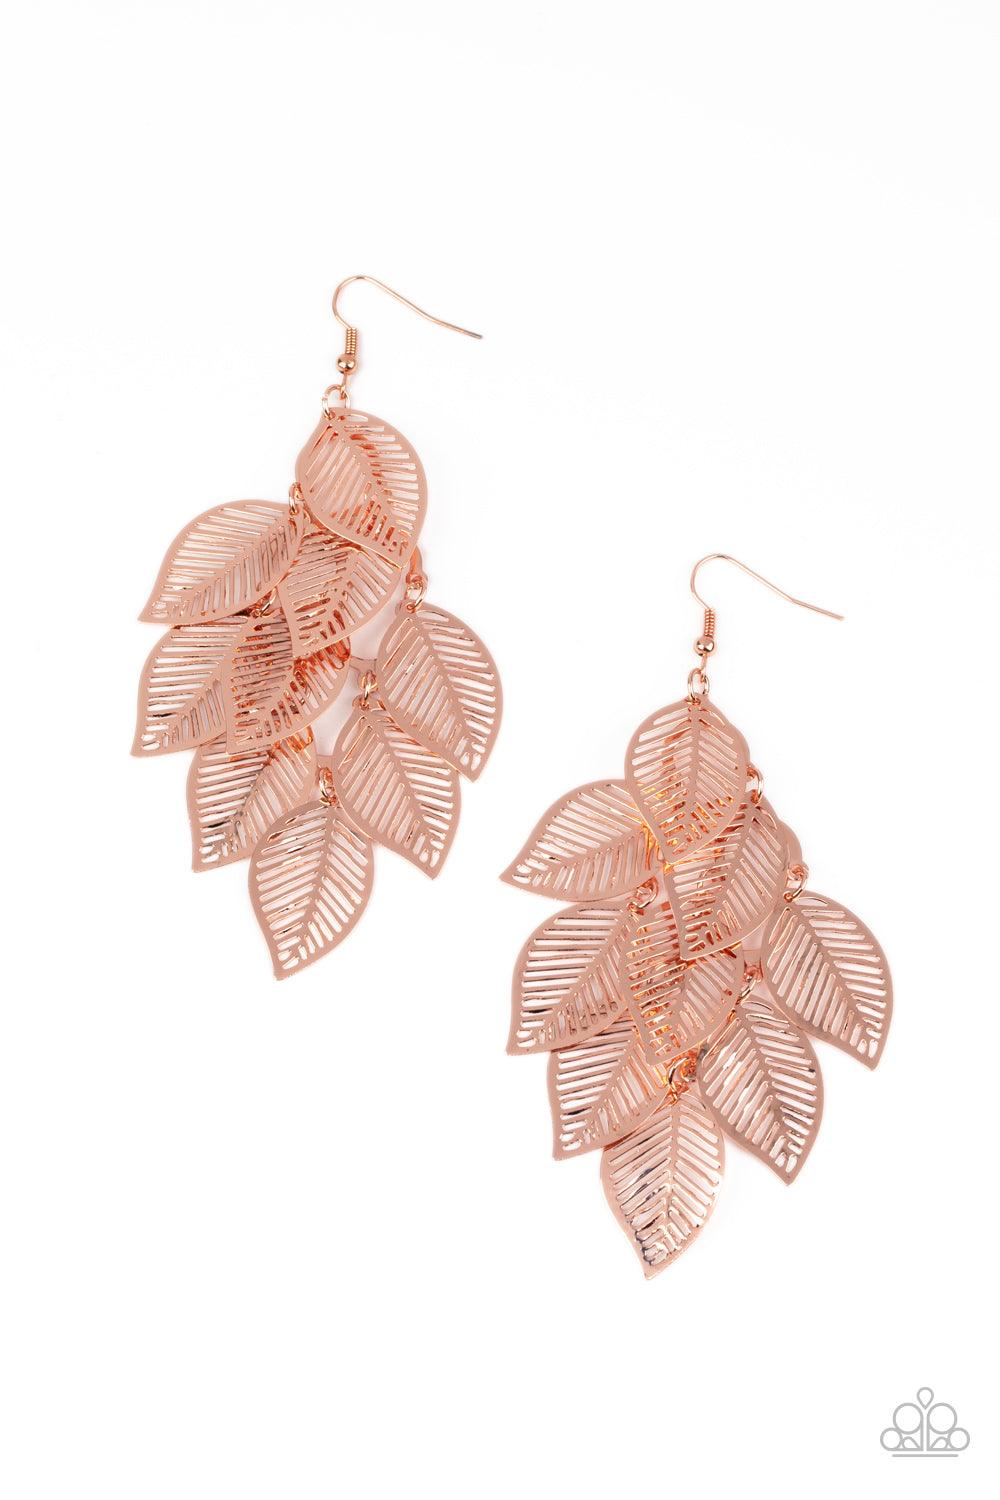 Paparazzi Accessories Limitlessly Leafy - Copper Stenciled shiny copper leaf frames cascade from a shiny copper netted fitting, creating a shimmery leafy fringe. Earring attaches to a standard fishhook fitting. Sold as one pair of earrings. Jewelry